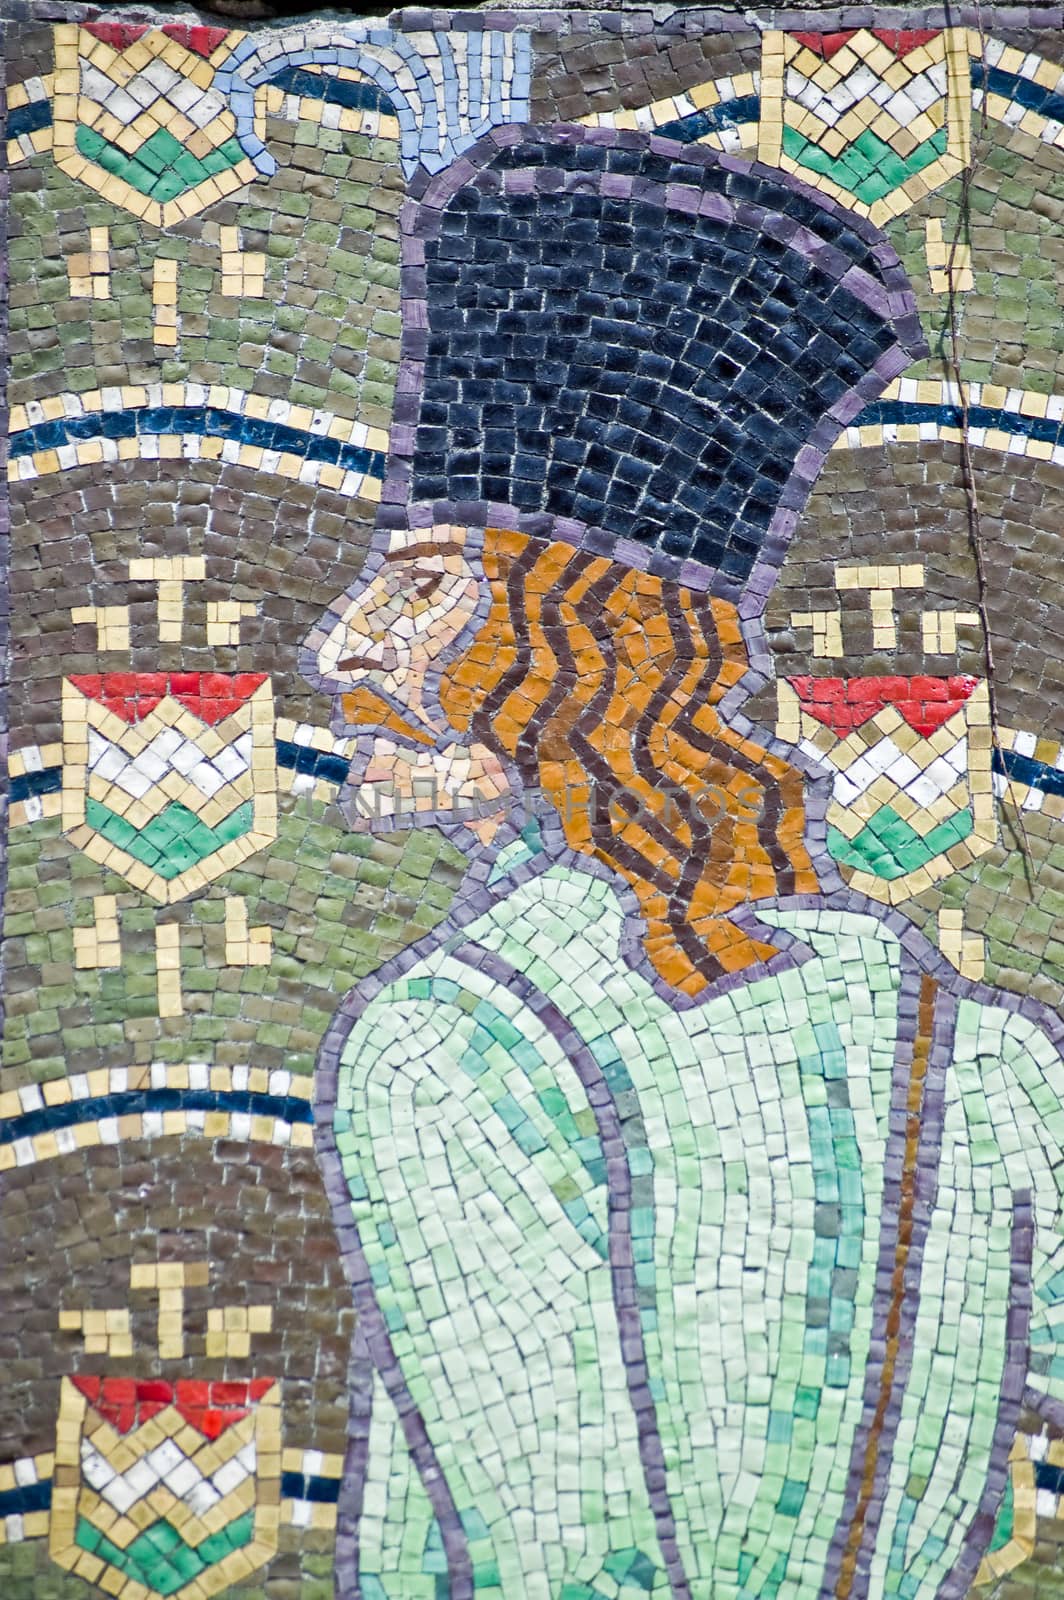 A mosaic depicting the renowned Hungarian poet Balint Balassa (1554-1594), founder of modern Hungarian lyric poetry. Monument on public display outside the Hungarian Pavilion in Giardini, Venice.